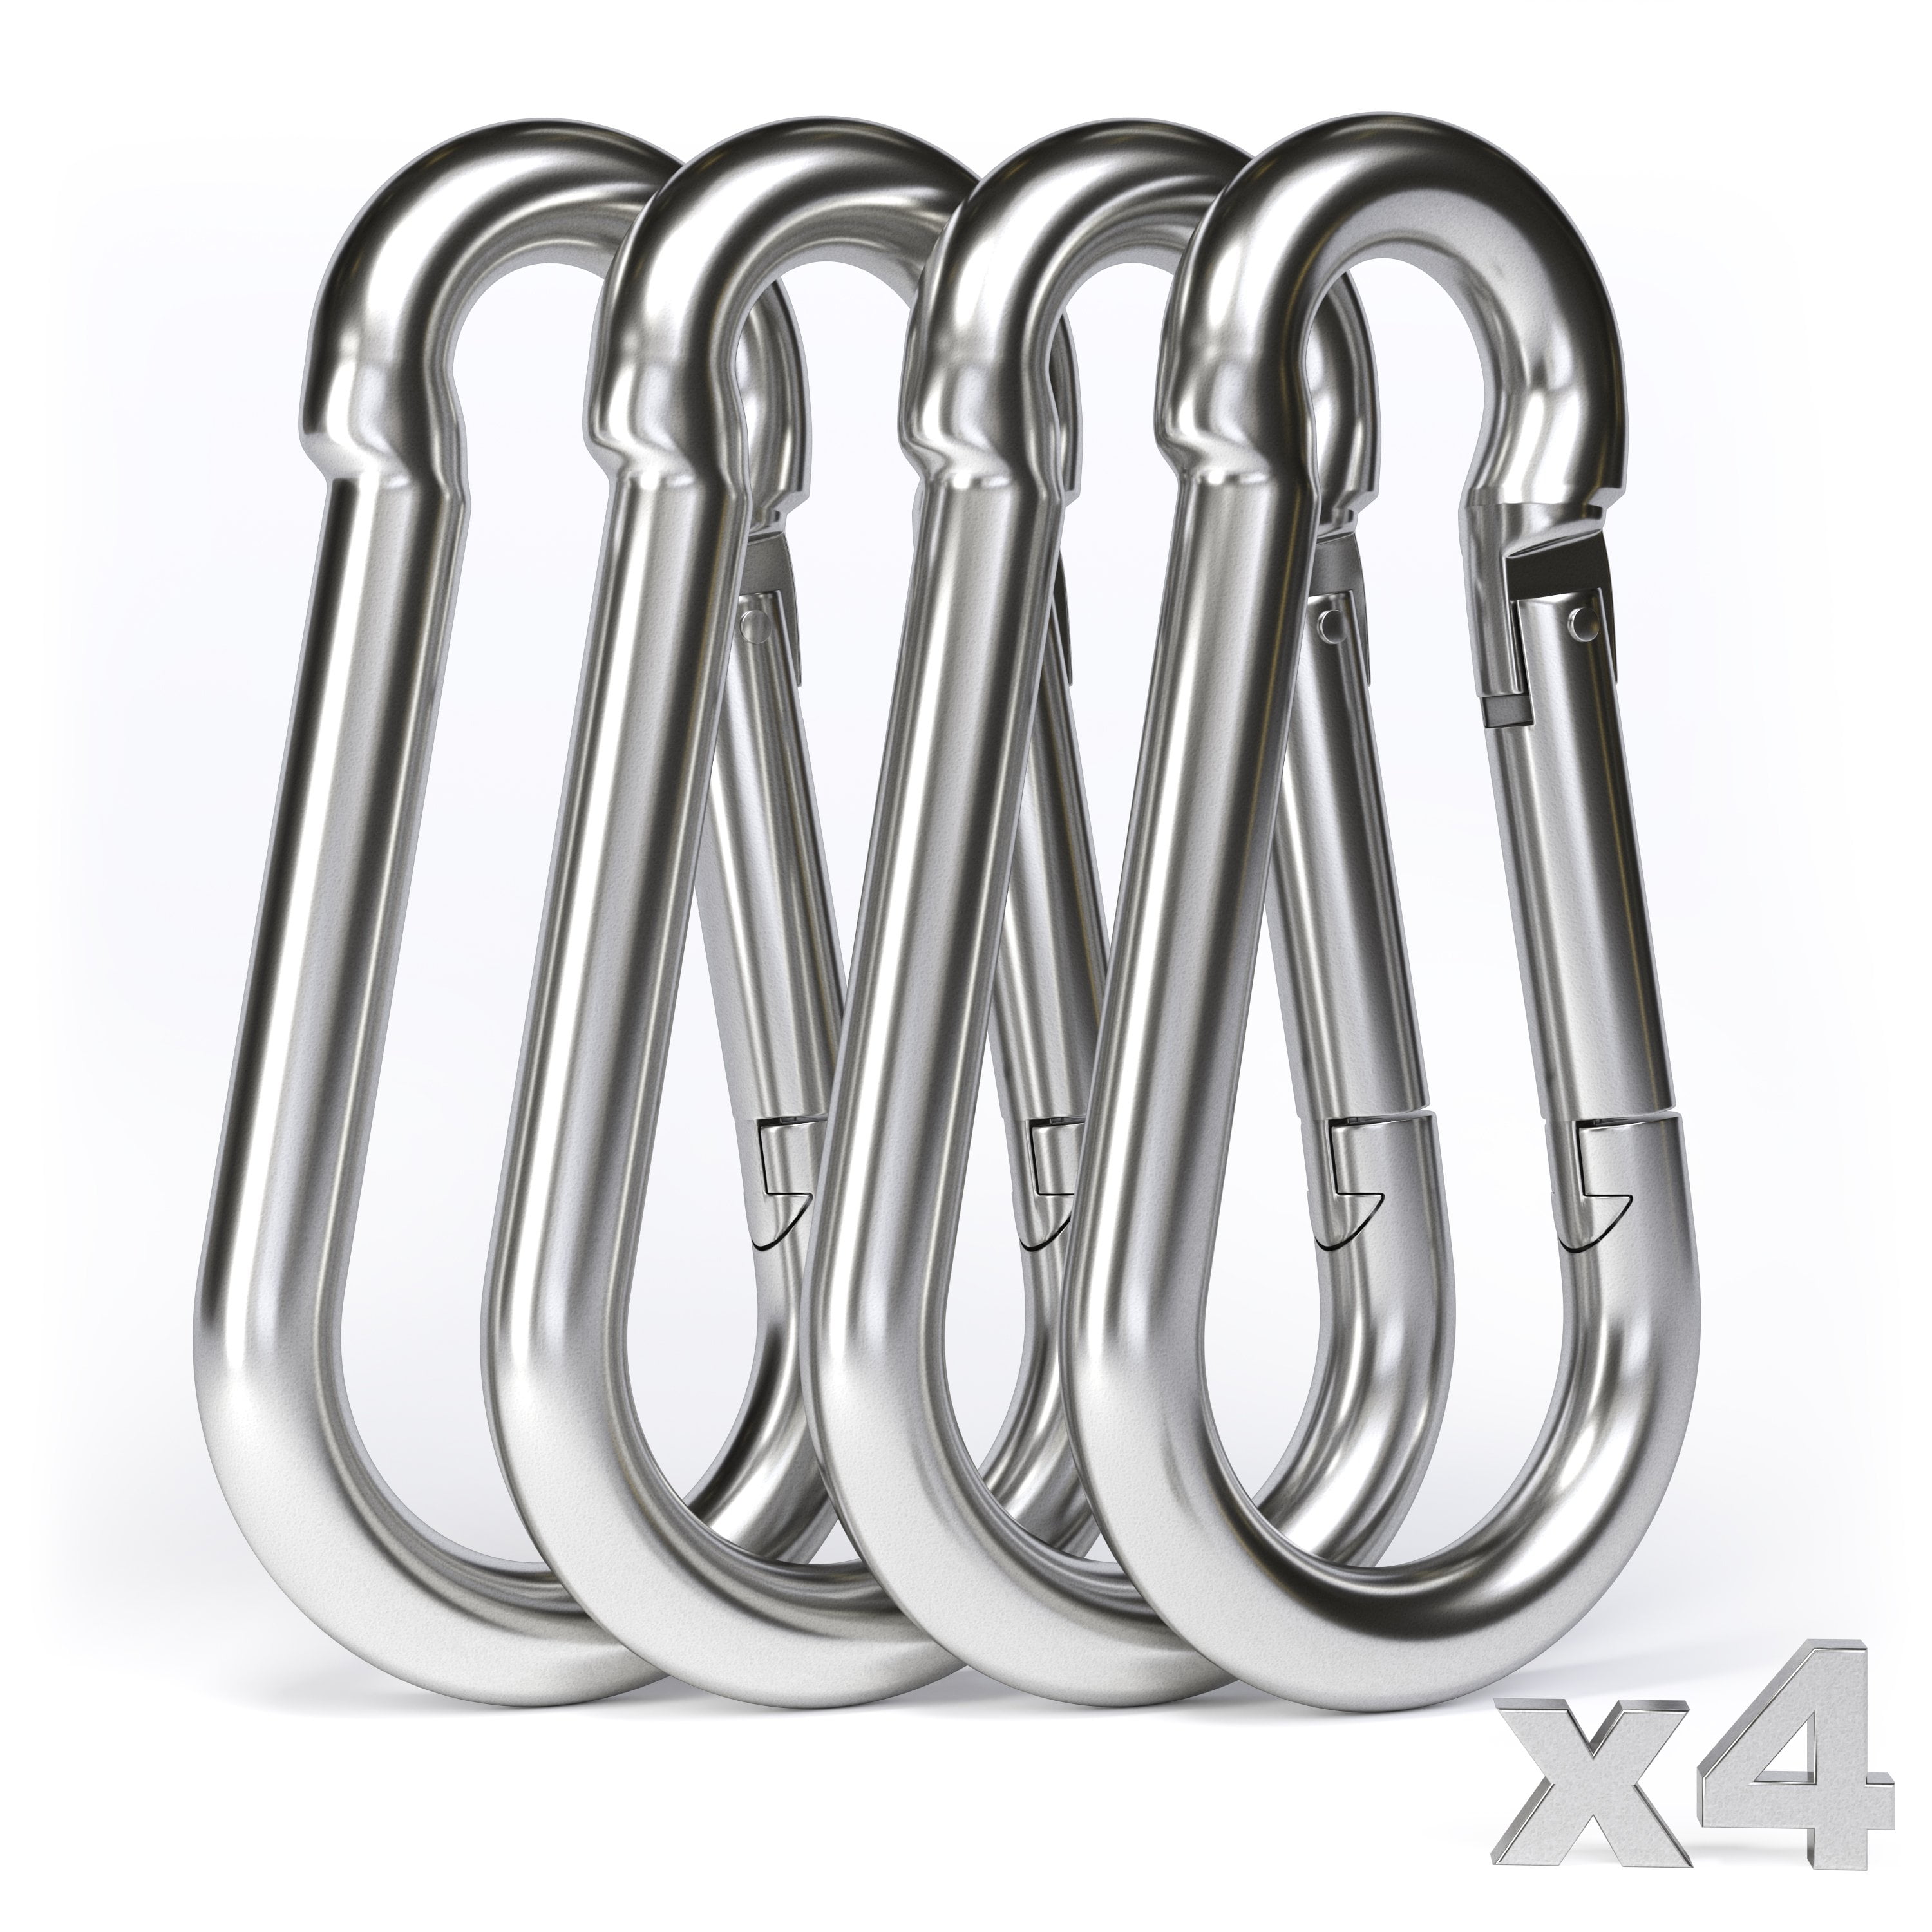 Stainless Steel Heavy Duty Clip Outdoor For Gym, 2 Spring Snap Hook Carabiner 